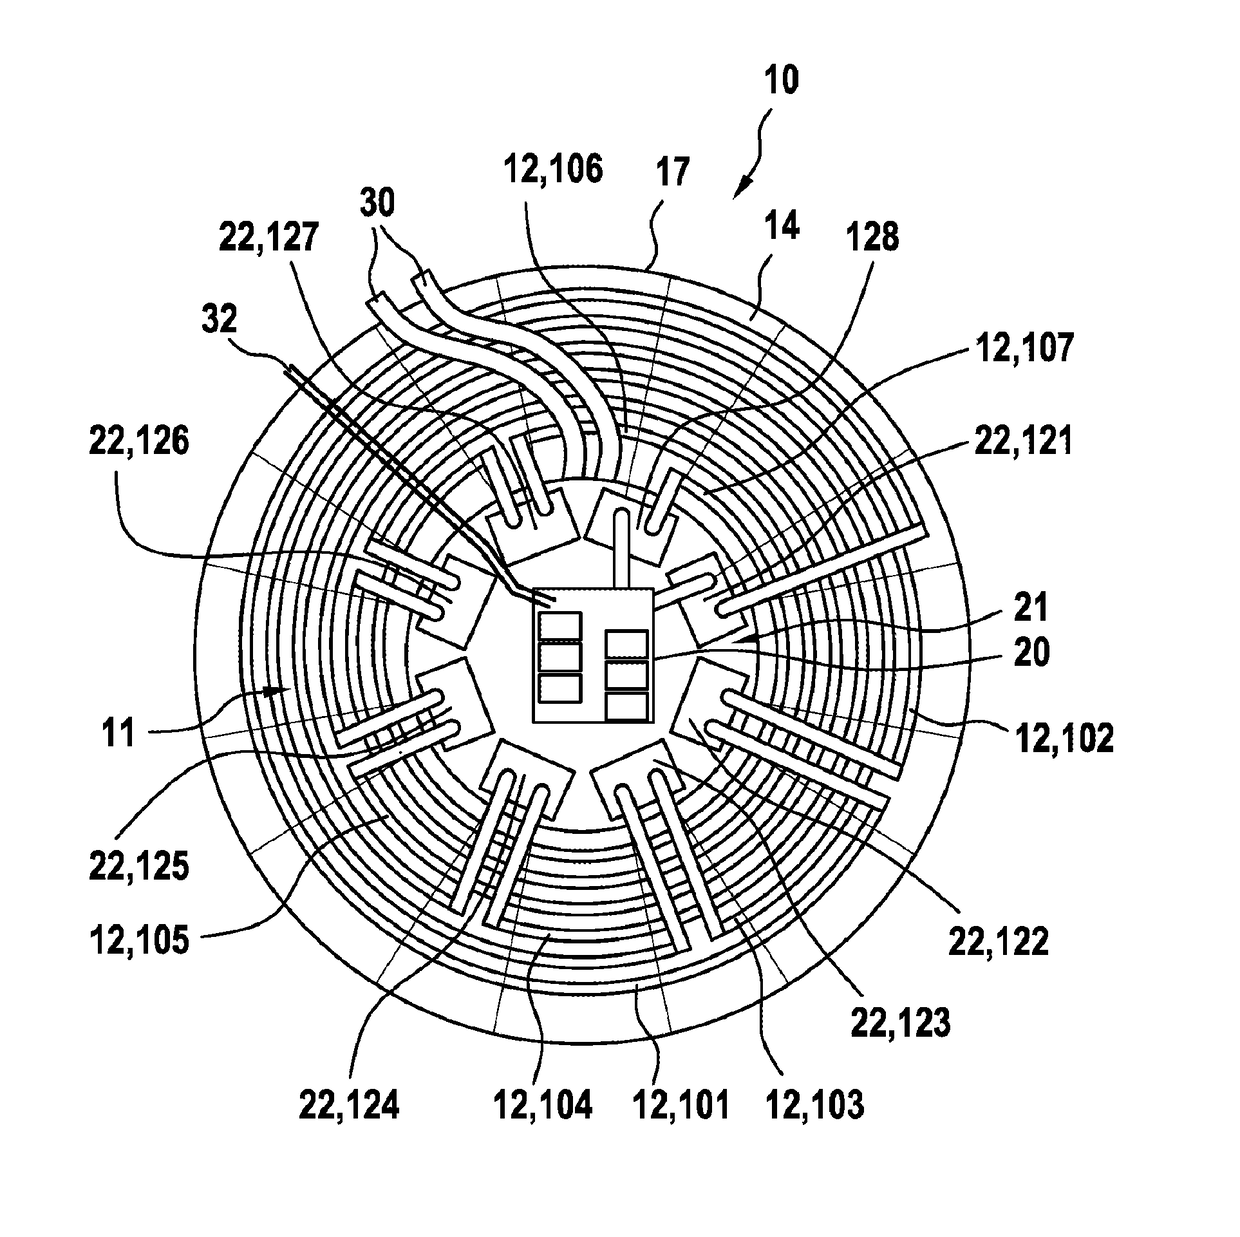 Transmission coil for the inductive transfer of energy